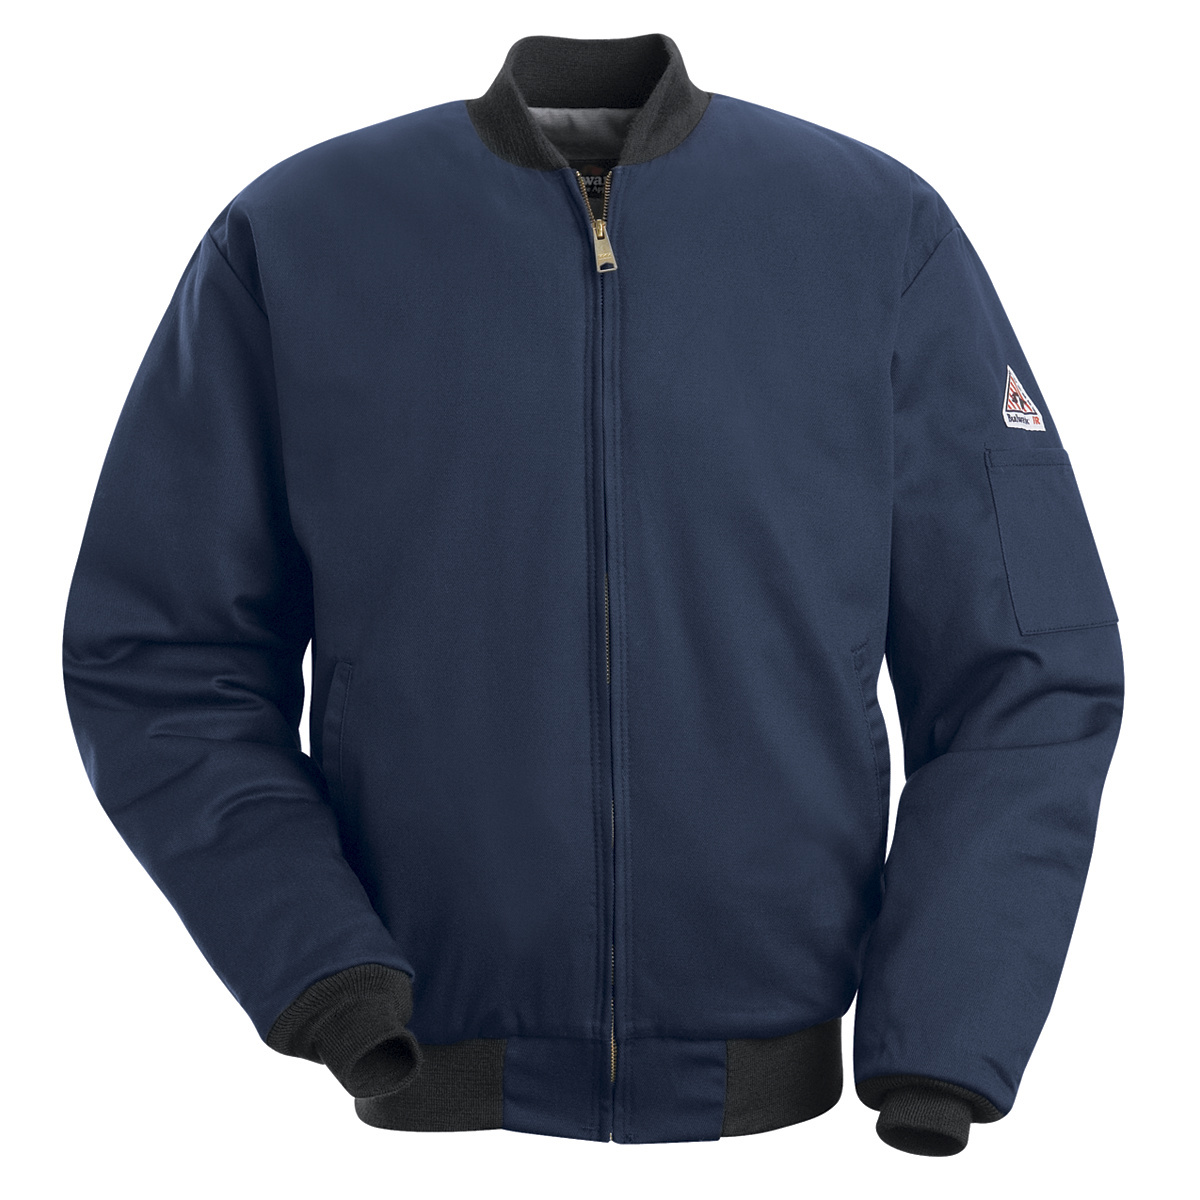 Bulwark® 3X Regular Navy Blue EXCEL FR® Twill Cotton Water Repellent Flame Resistant Jacket With Cotton Lining And Zipper Front